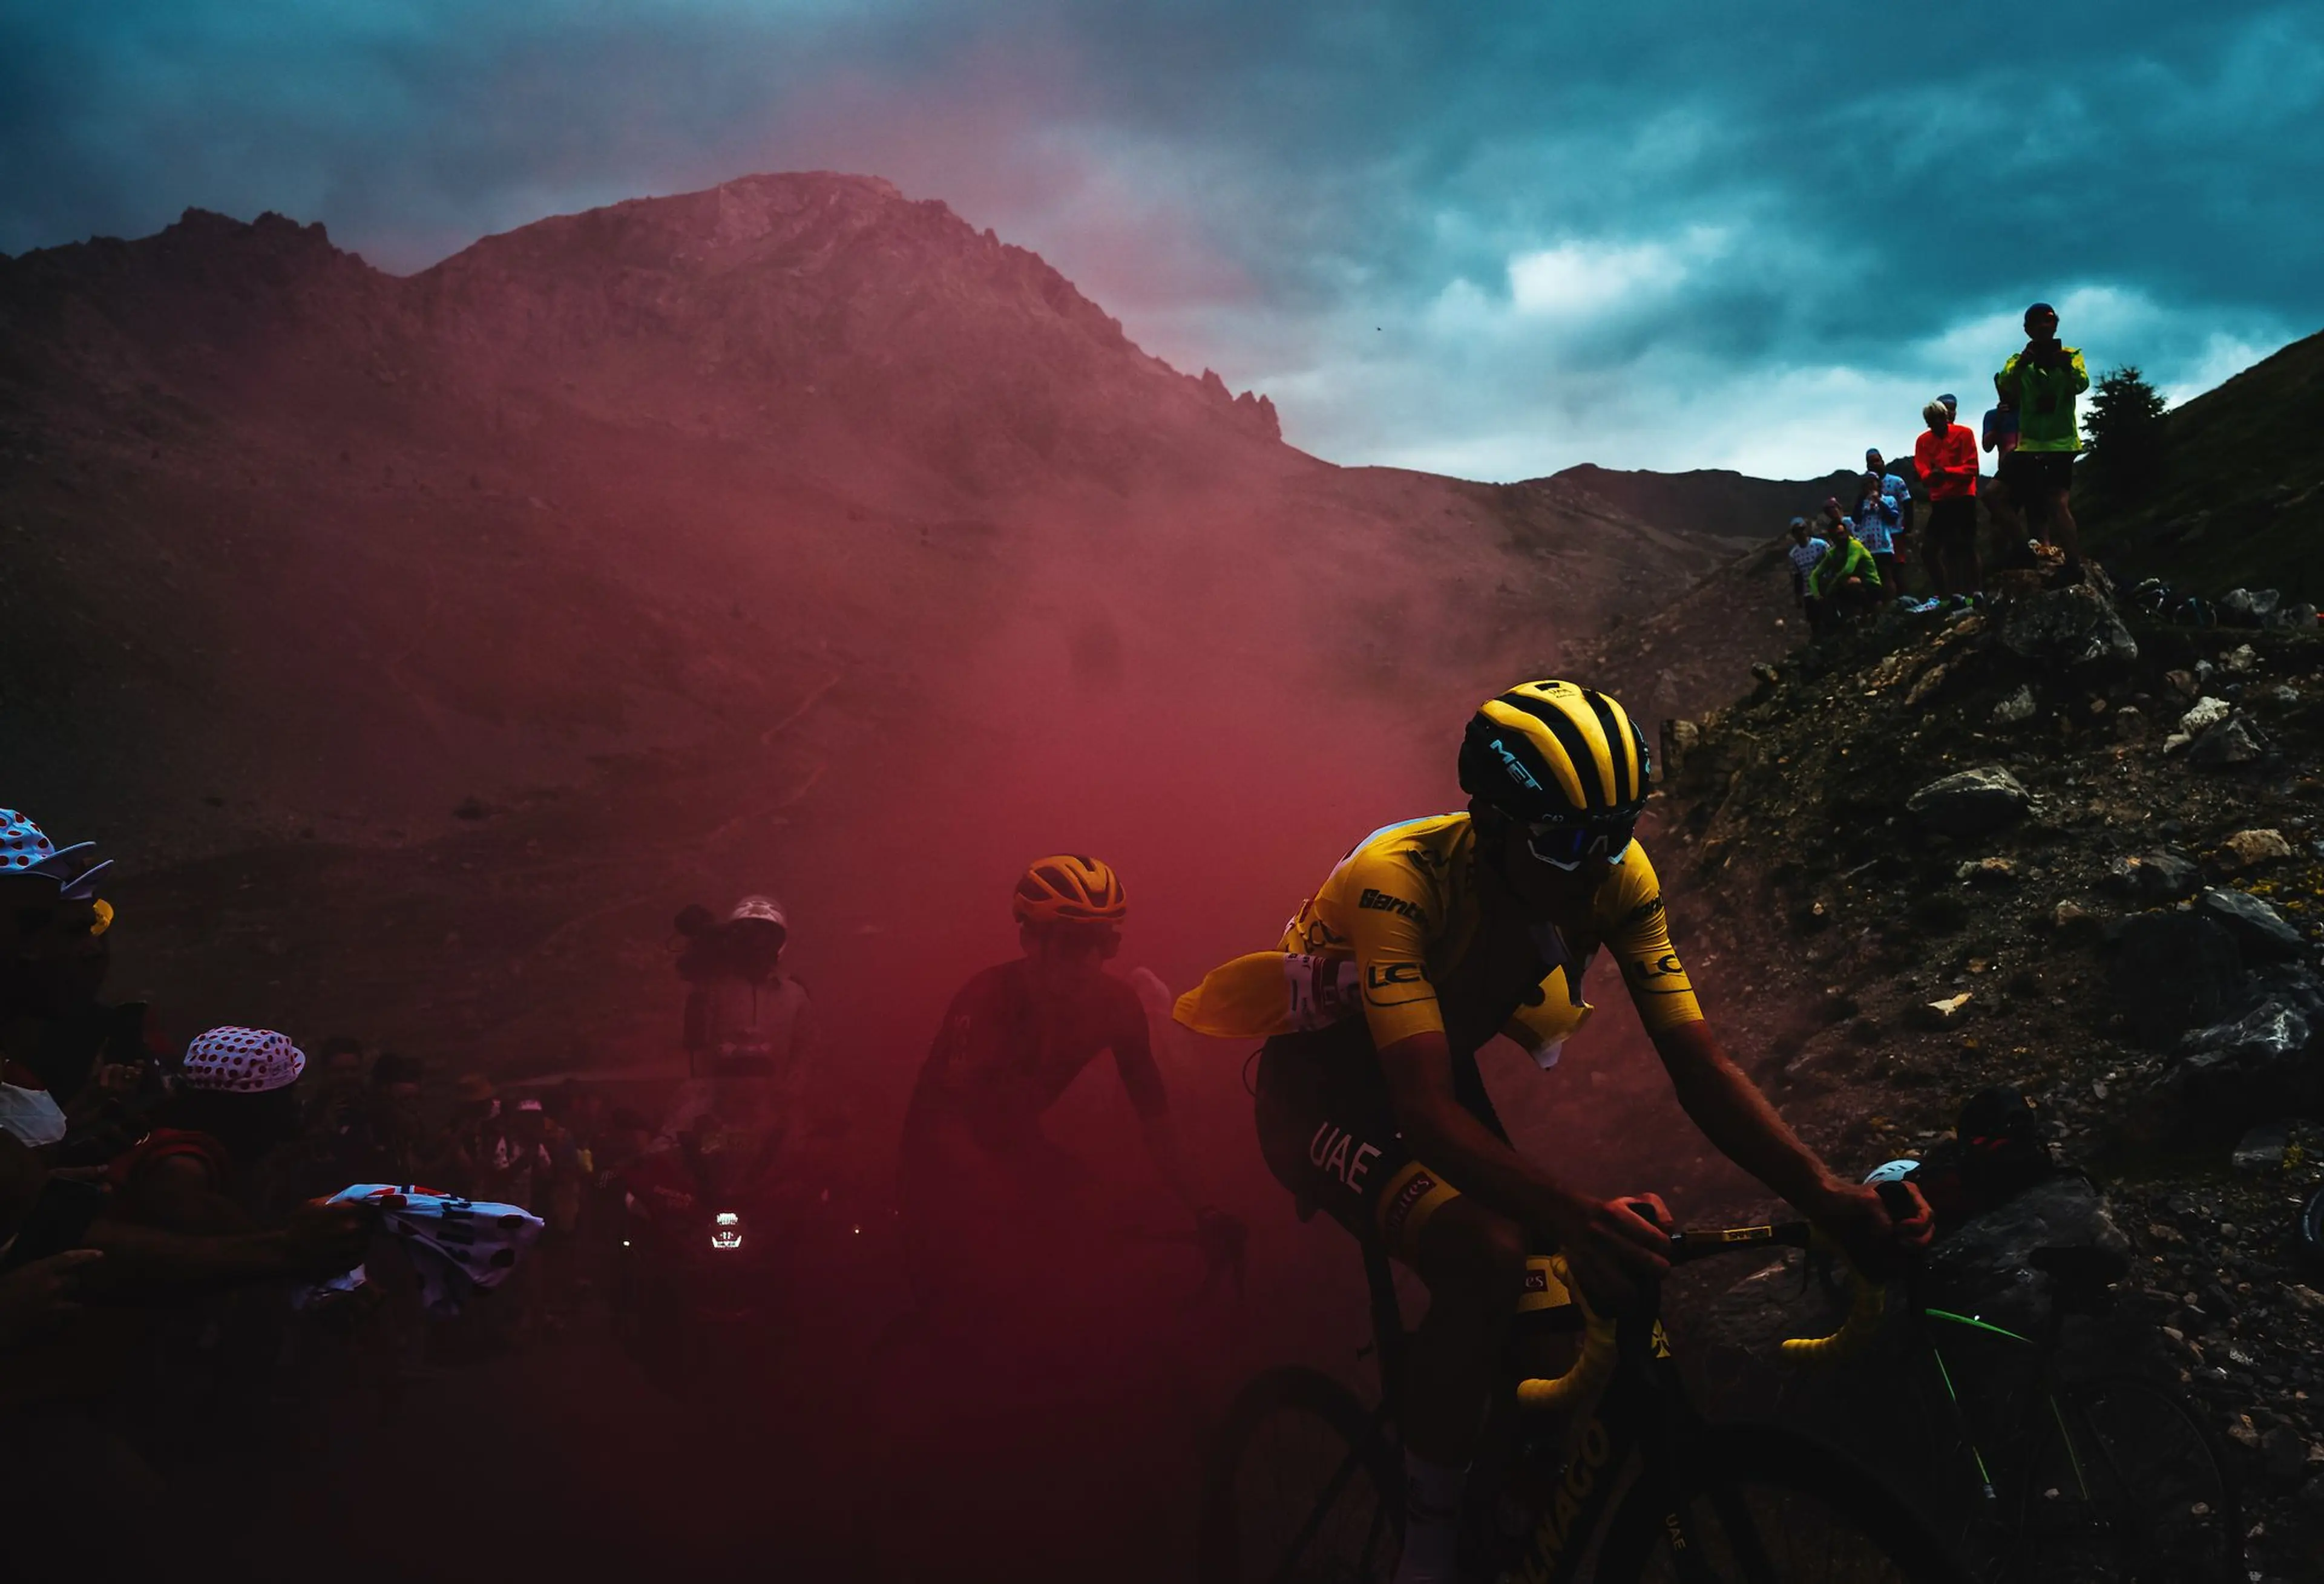 Tadej Pogačar rides through smoke set off by a fan while climbing the Granon on Stage 11. Pogačar lost several minutes to Jonas Vingegaard on the stage and would give up the yellow jersey.